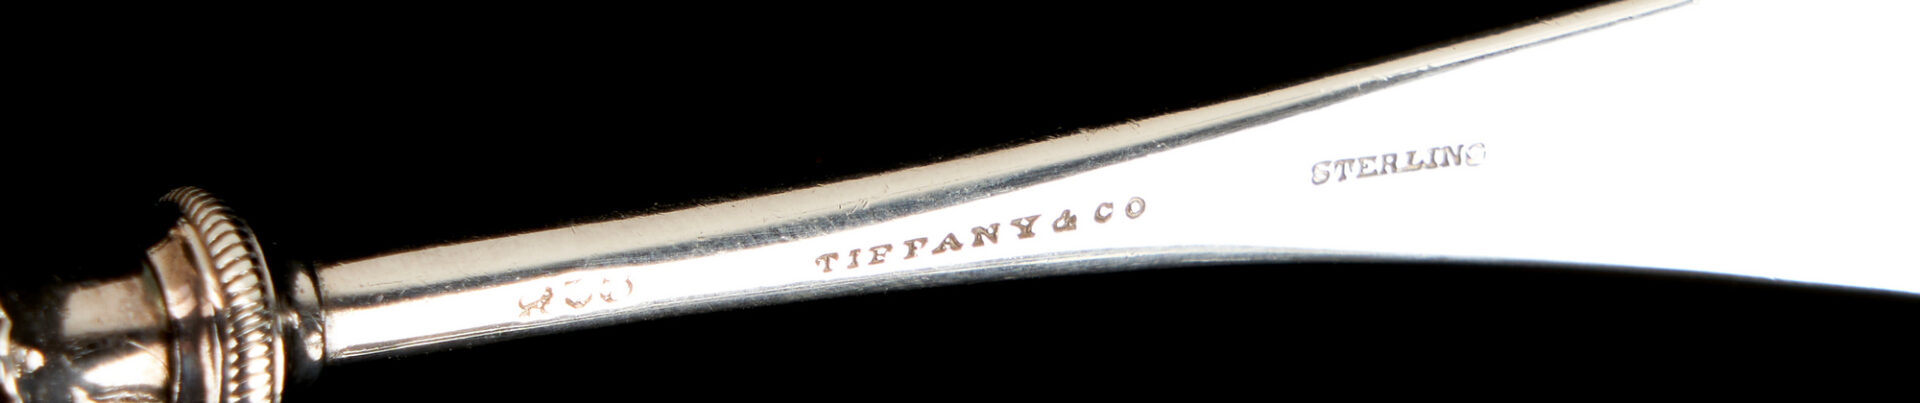 Lot 758: 10 pcs Tiffany Sterling Silver incl. Florentine Ice Tongs